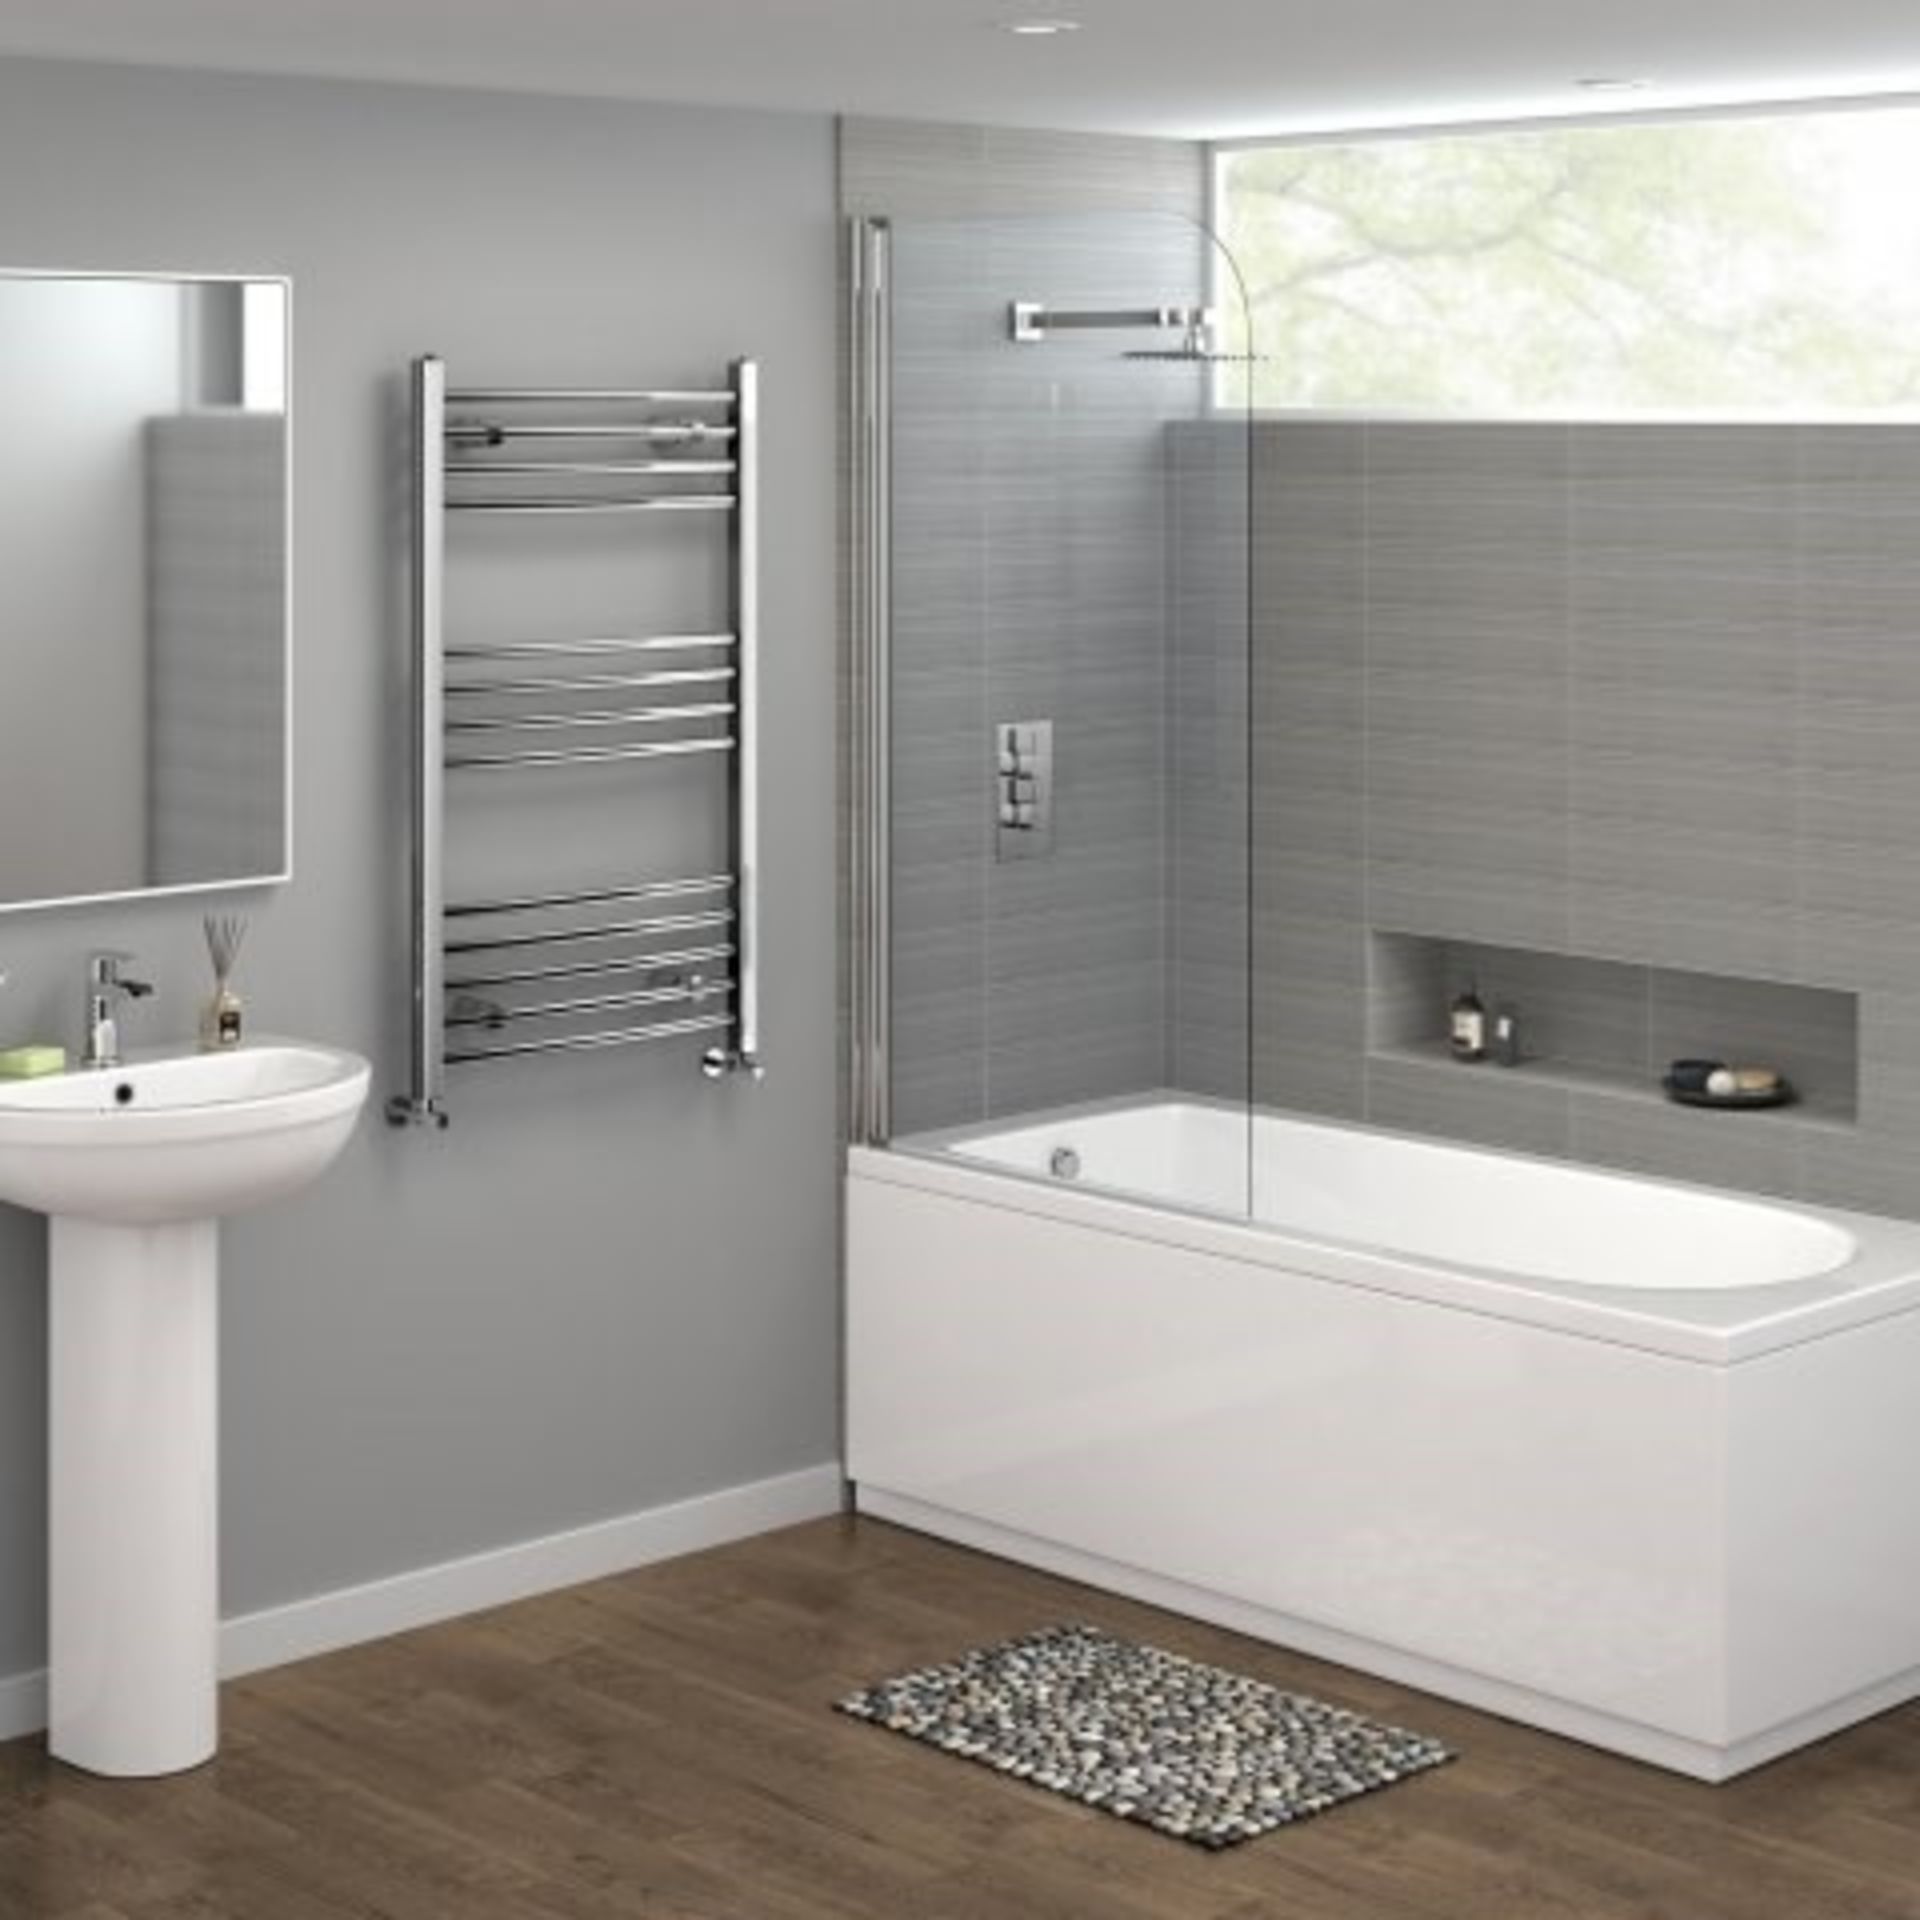 NEW & BOXED 1200x600mm - 20mm Tubes - RRP £219.99.Chrome Curved Rail Ladder Towel Radiator. O... - Image 2 of 3